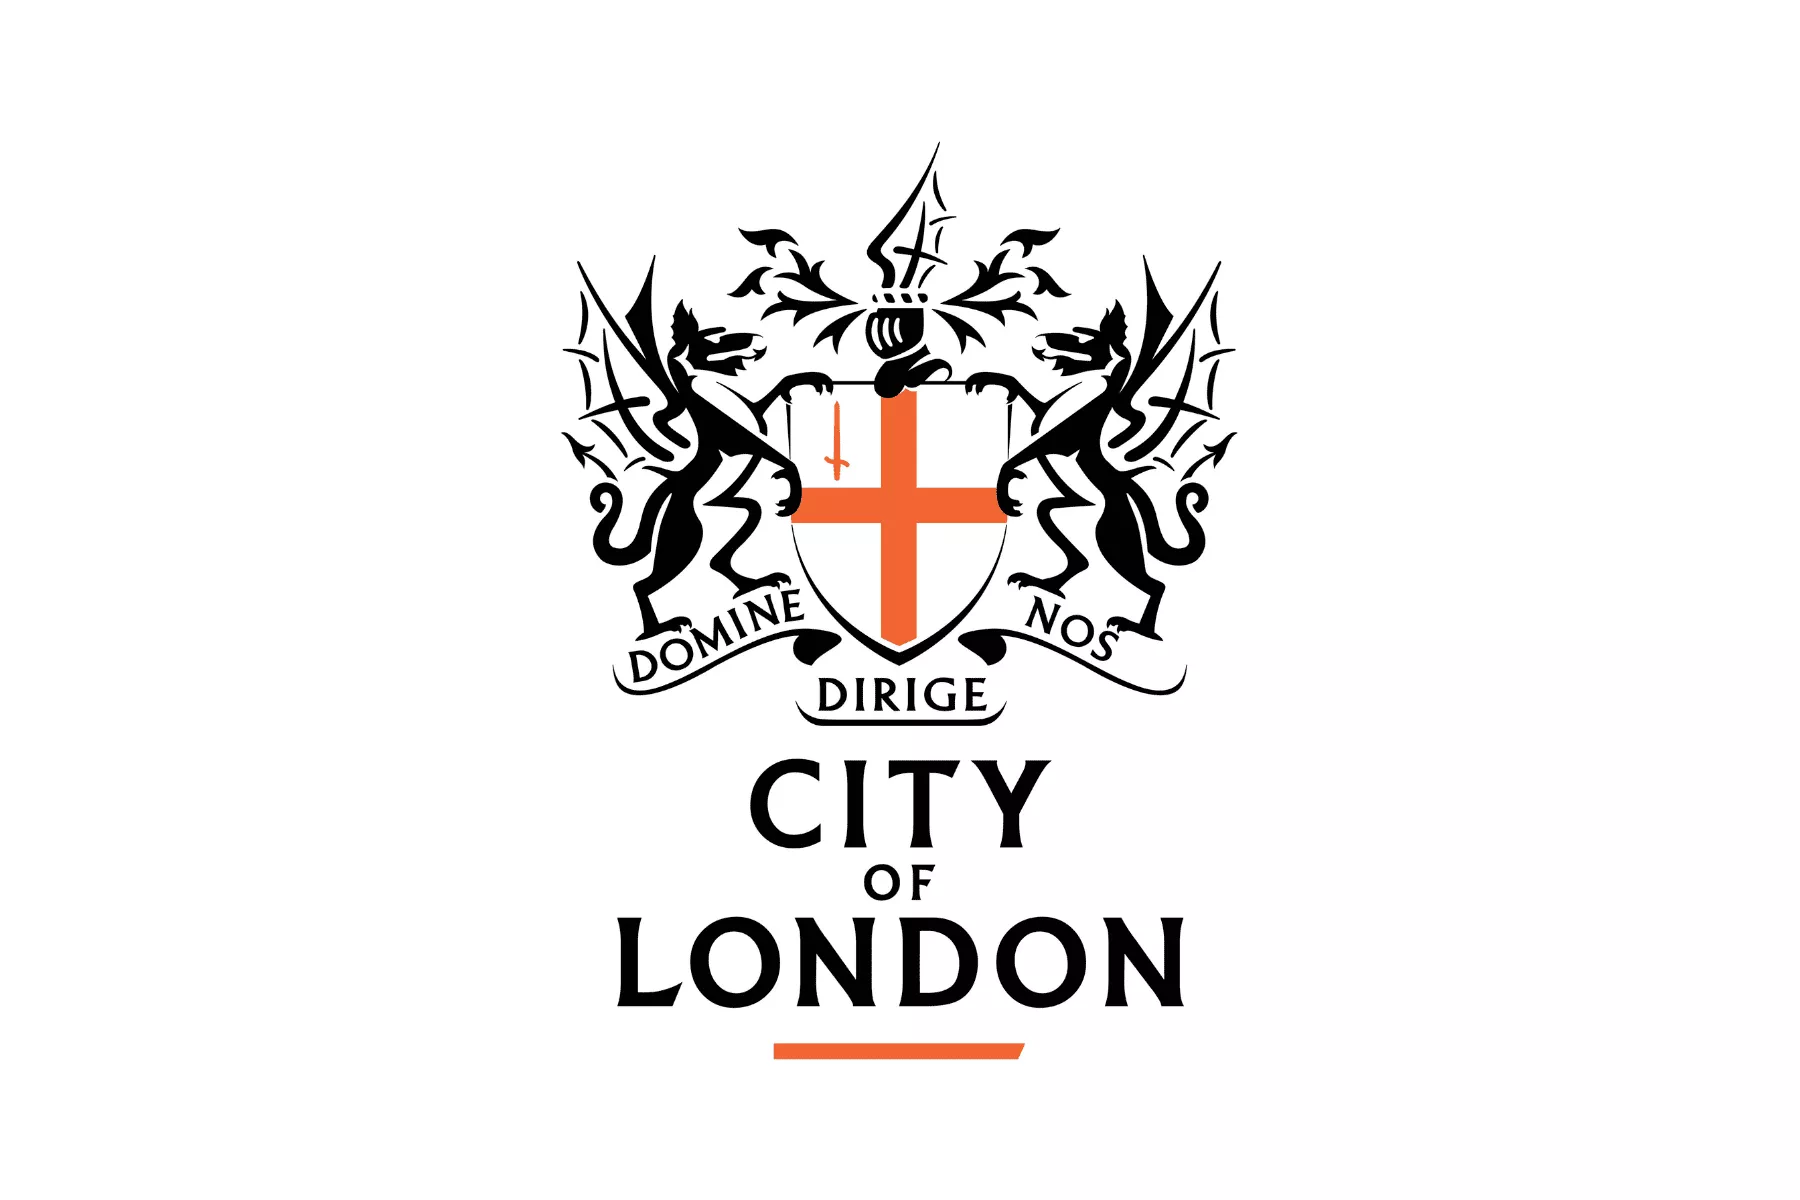 The crest of the City of London in black and red